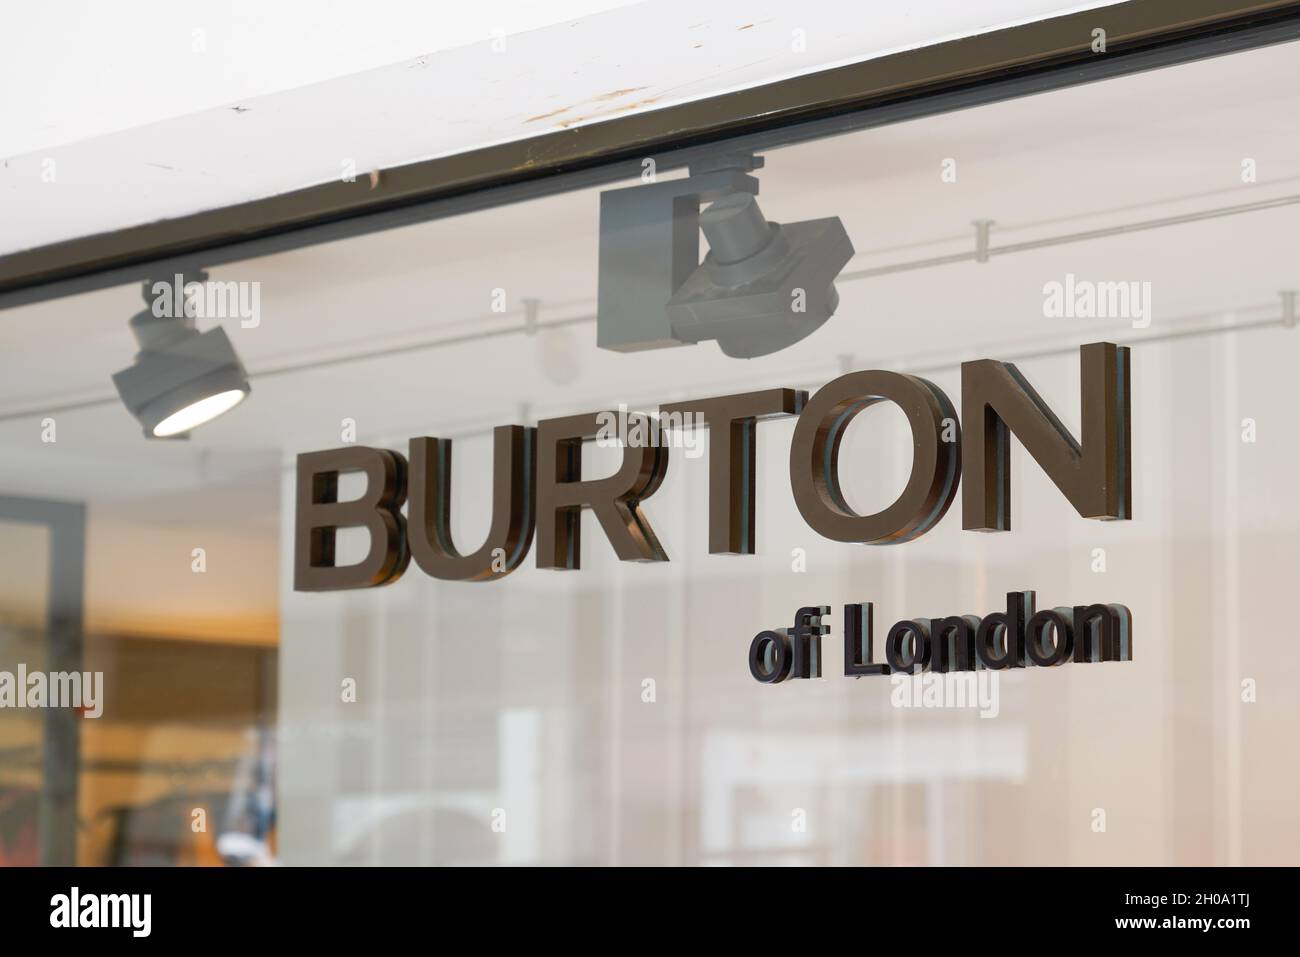 toulouse , occitanie France  - 06 25 2021 : Burton of london sign text store and logo brand shop on facade boutique Stock Photo